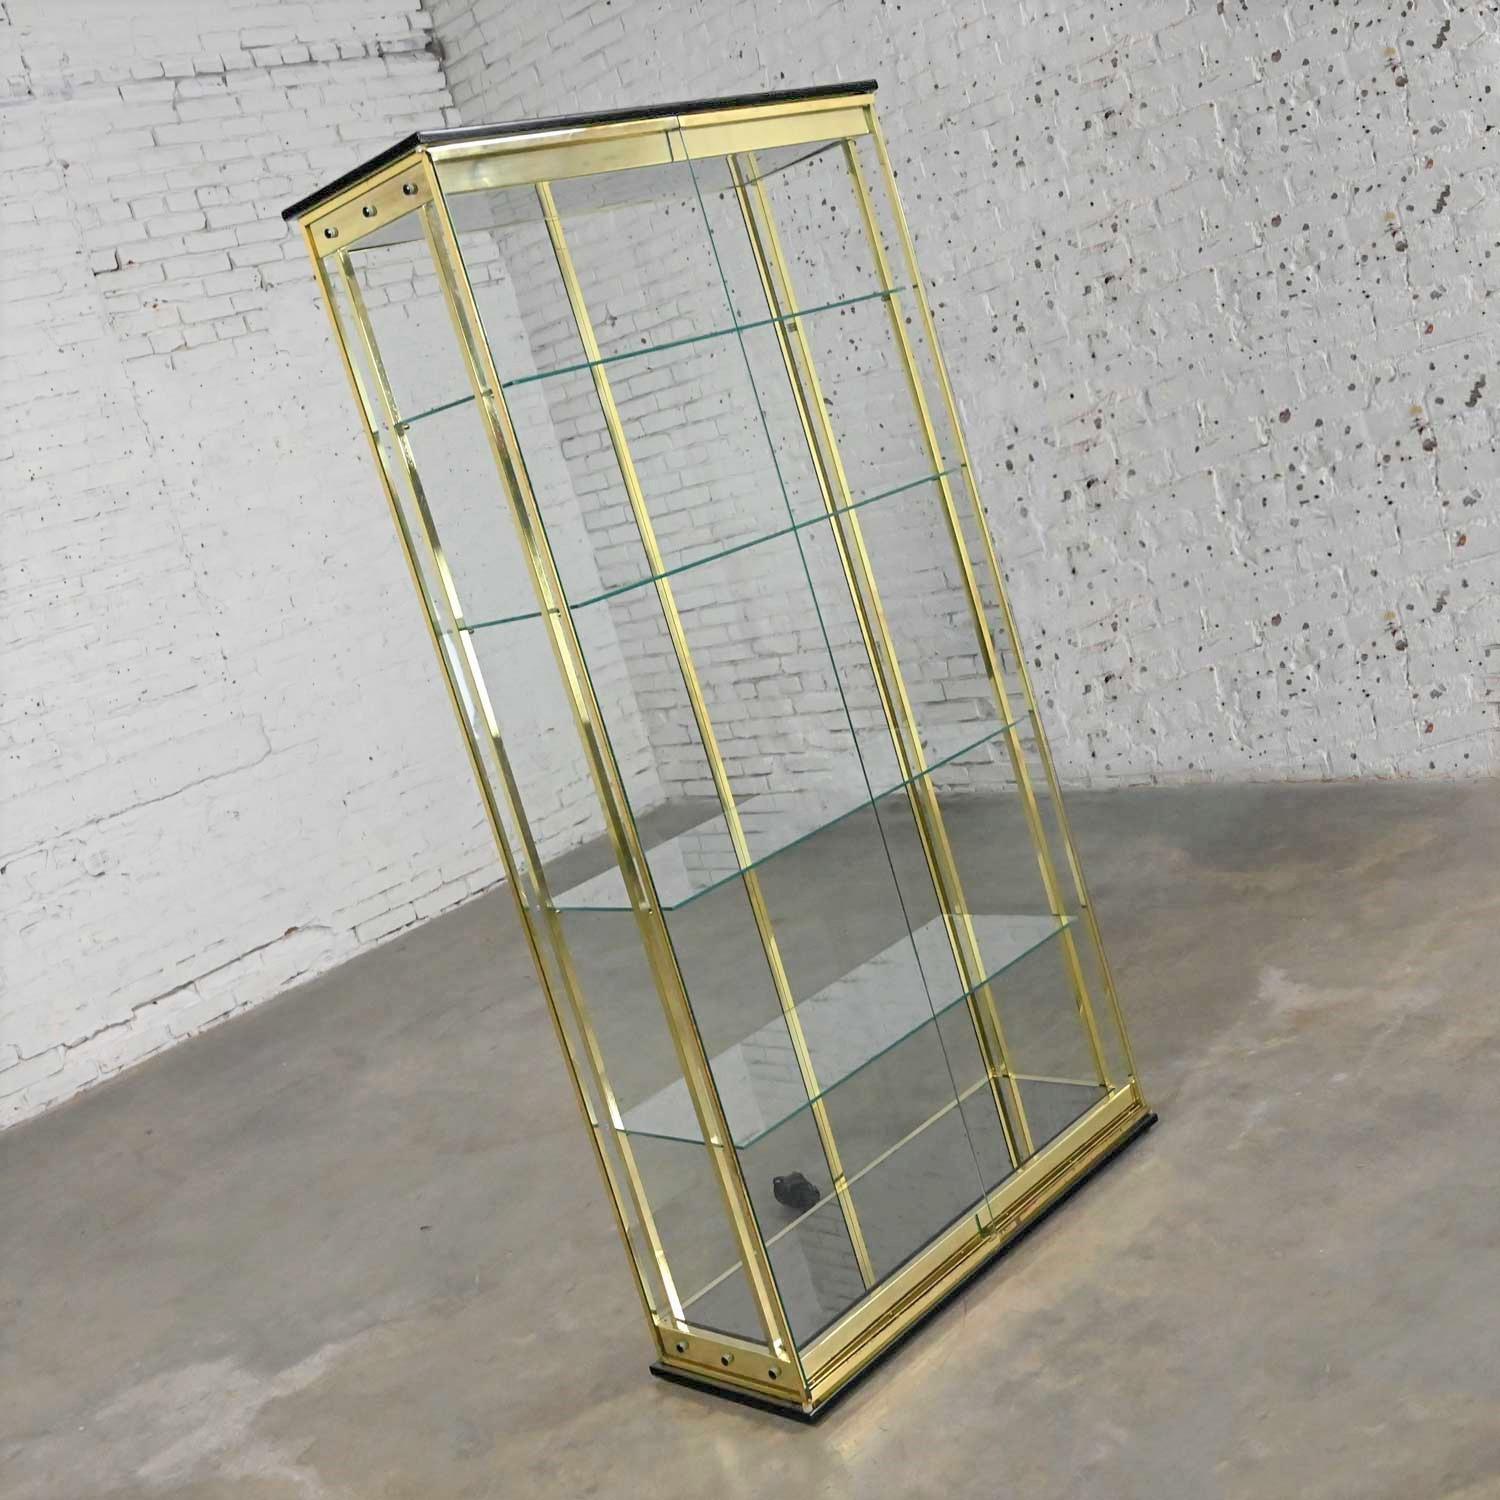 Gorgeous modern all glass lighted display cabinet with brass plated framework, mirrored bottom shelf, four glass shelves, and black painted bottom rim, crown, and stud details. Beautiful condition, keeping in mind that this is vintage and not new so